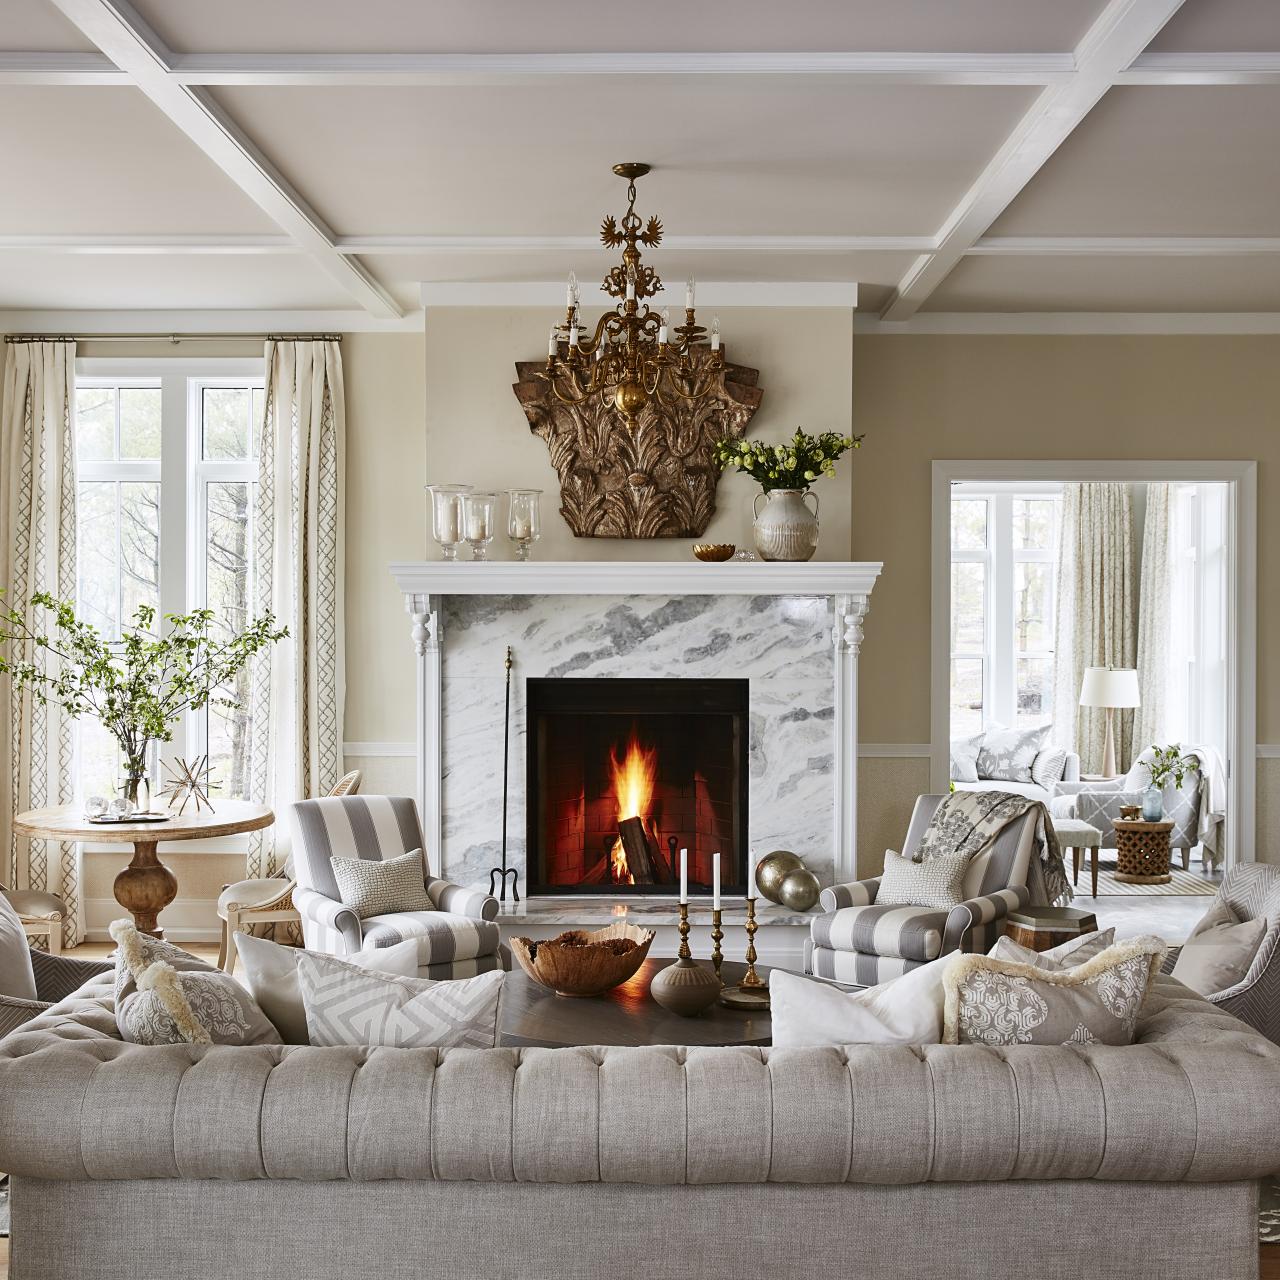 Traditional Design Style 101 | Everything You Need to Know About ...